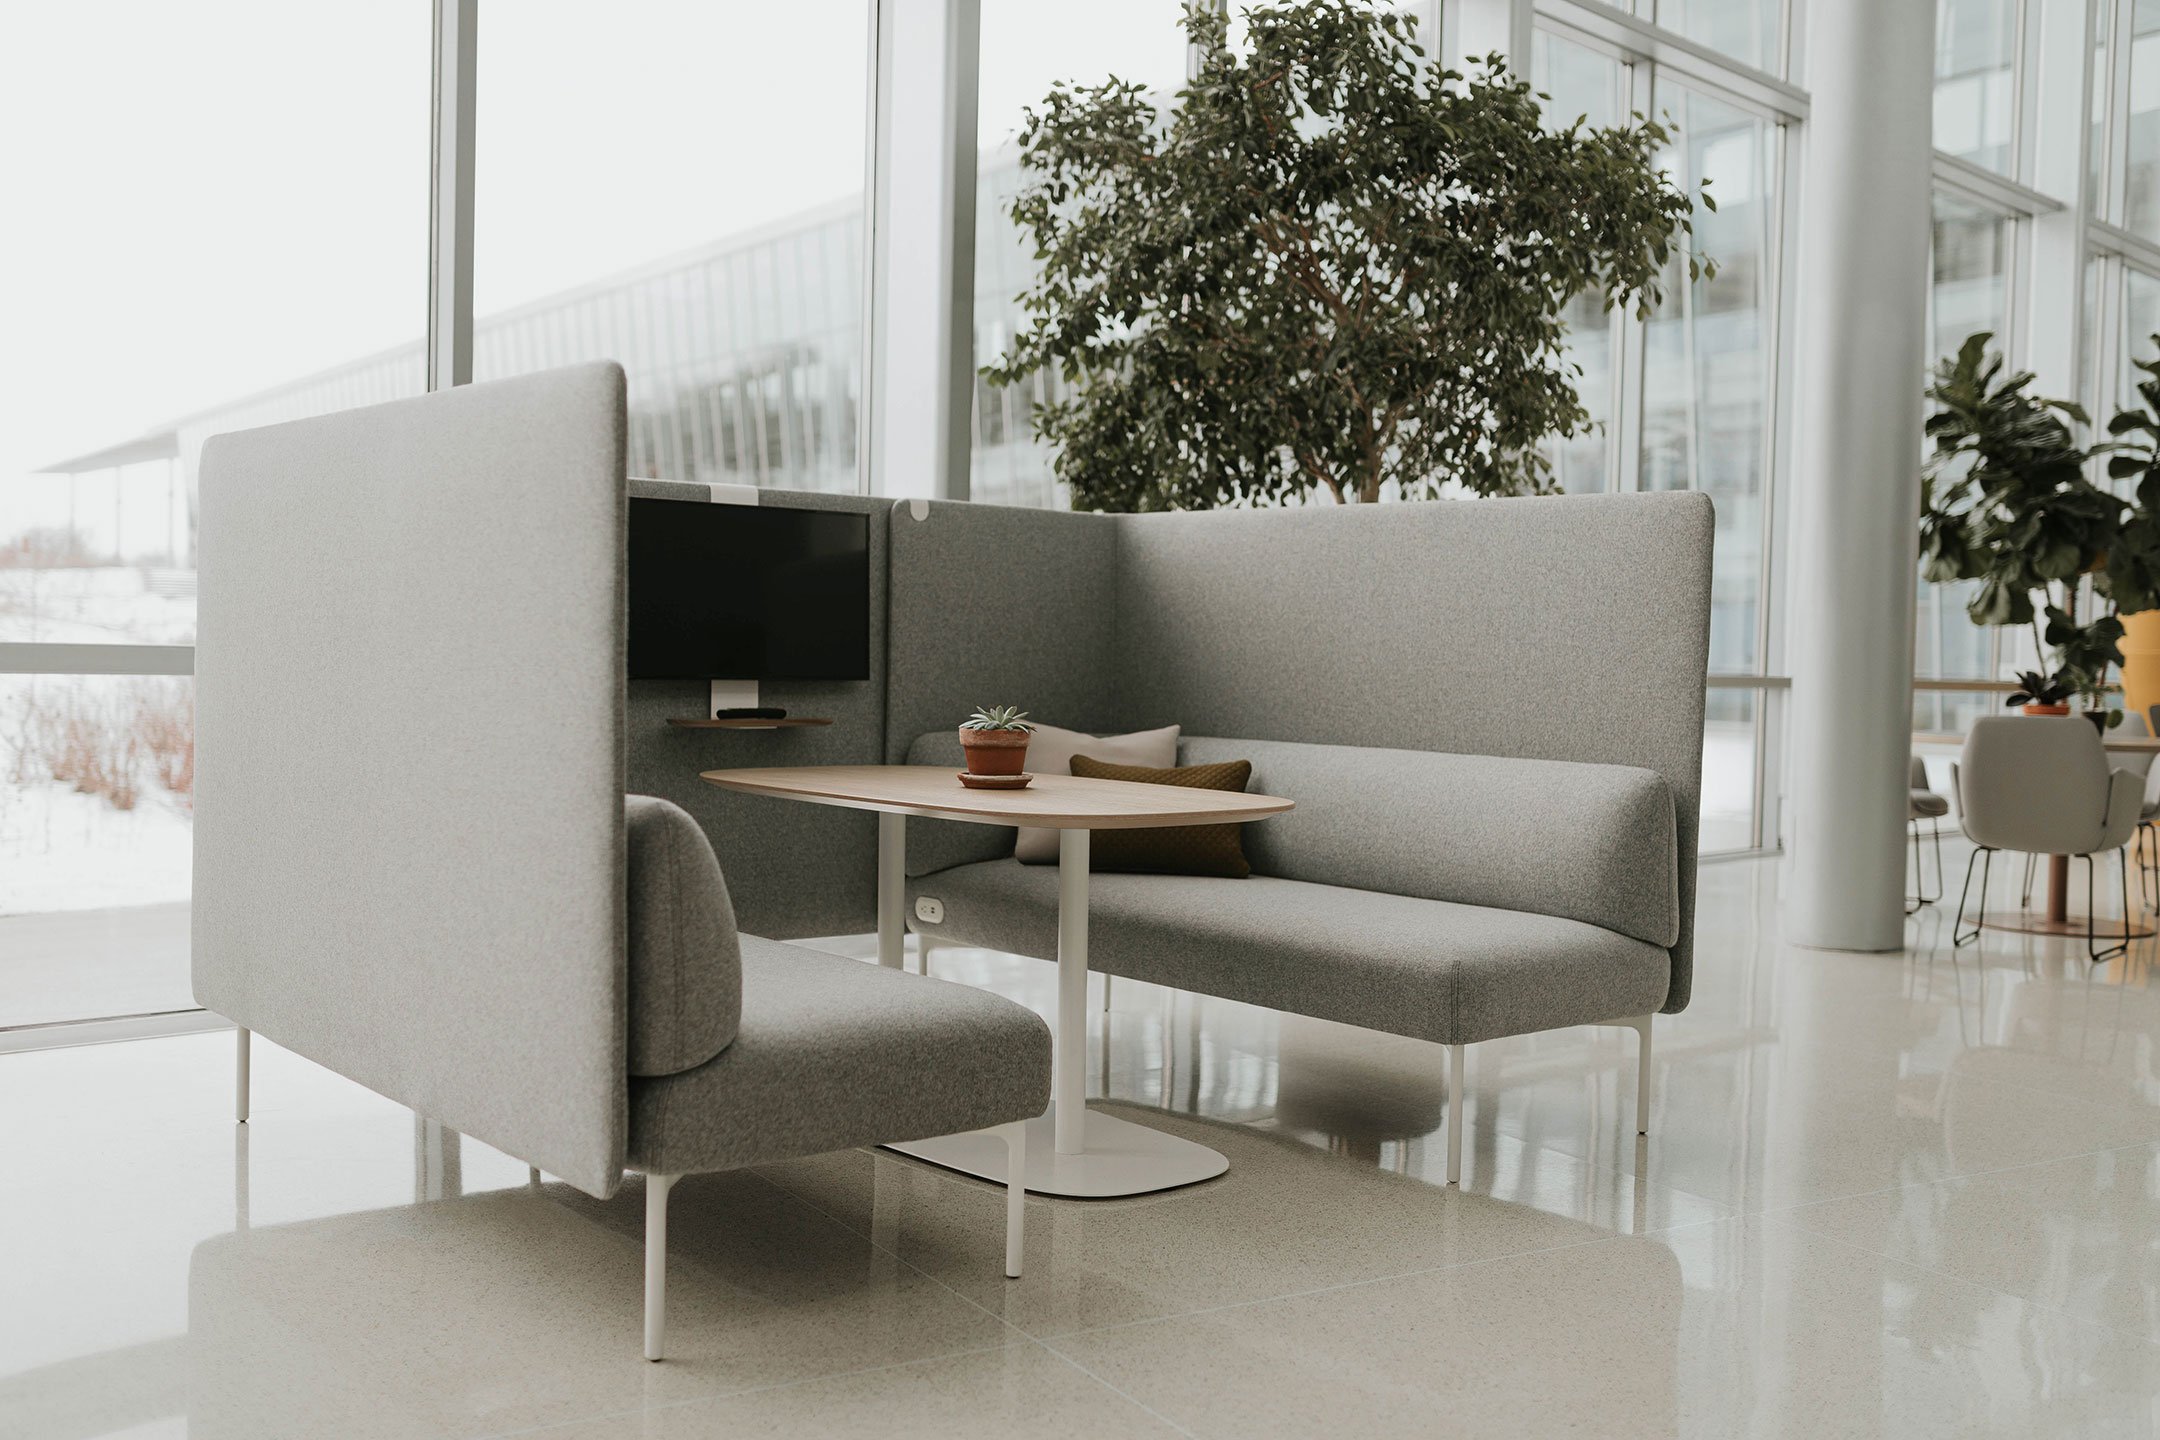 Haworth Cabana lounge connector screen in grey color in a reception area of an office